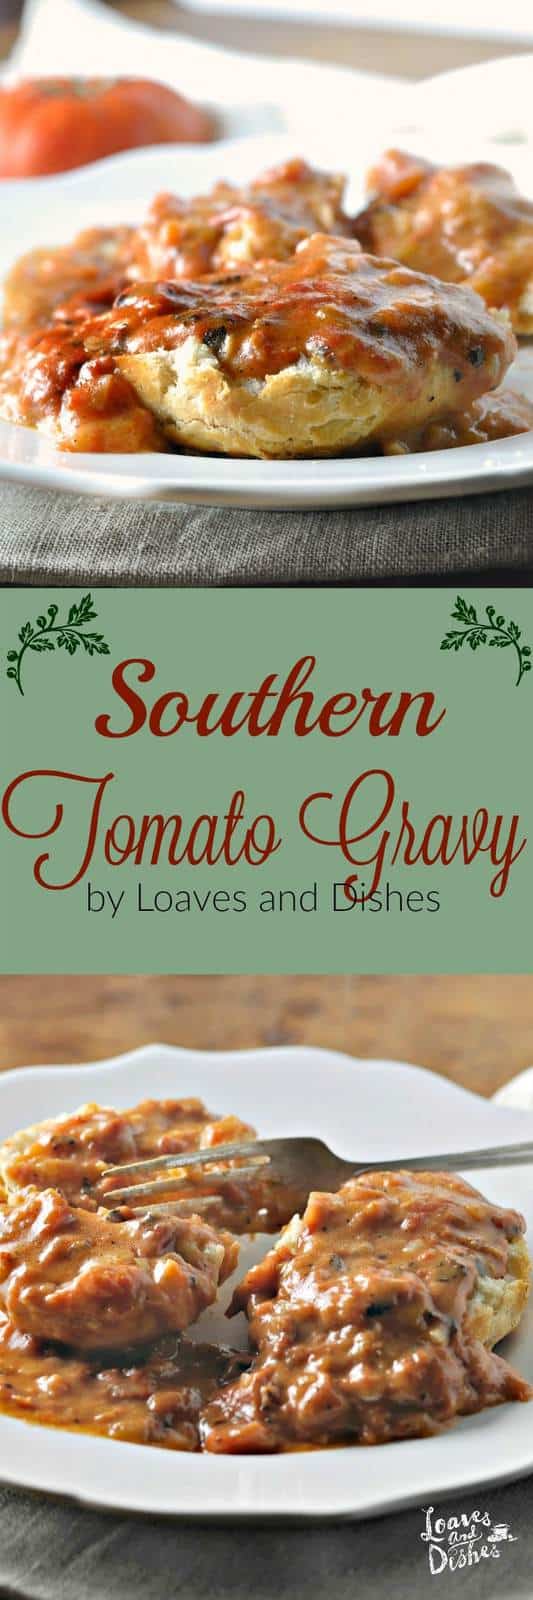 Southern Tomato Gravy • Loaves and Dishes